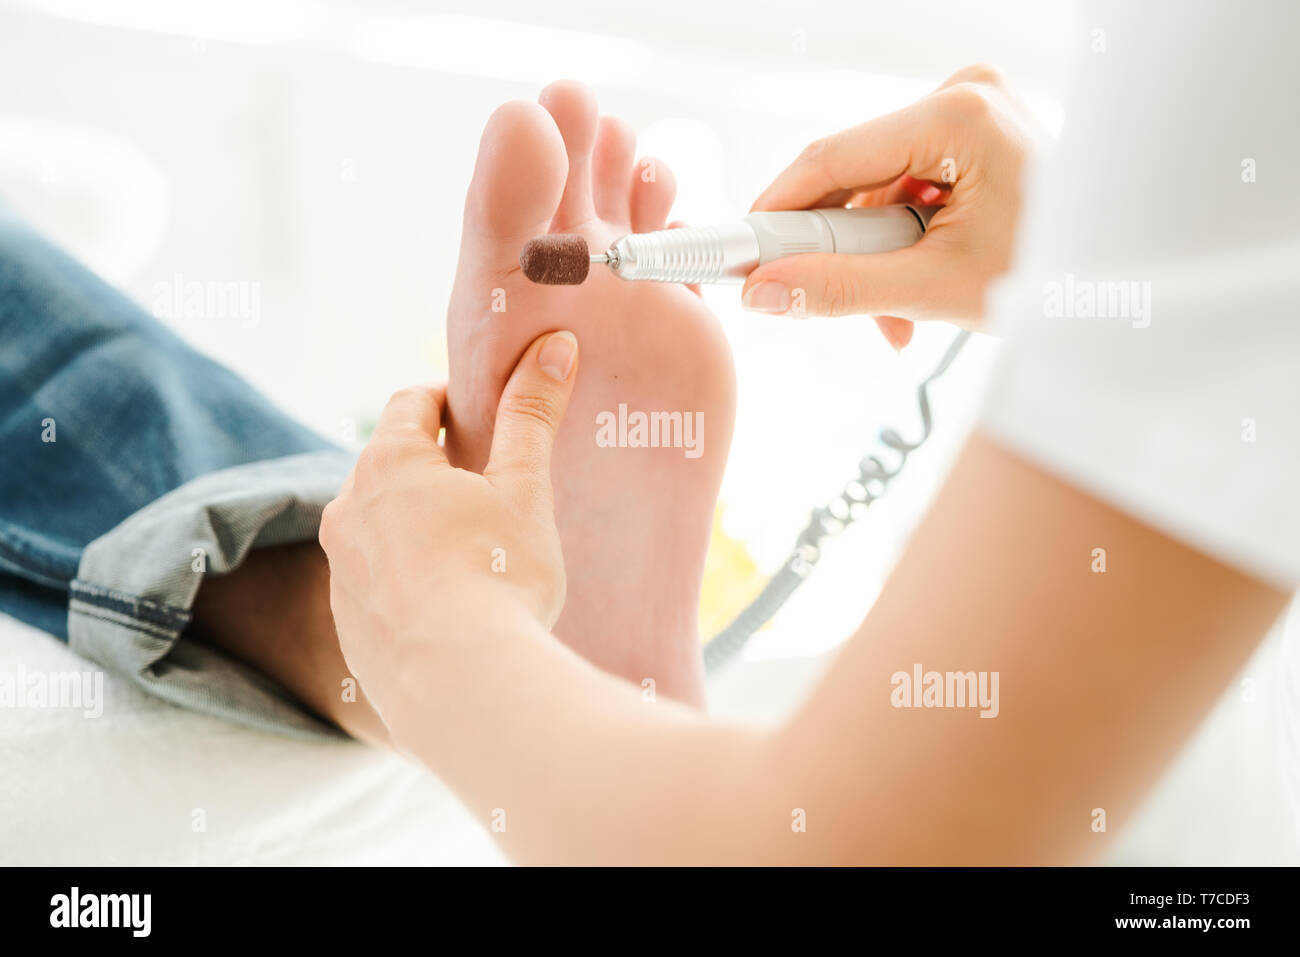 Man during medical podiatry session Stock Photo